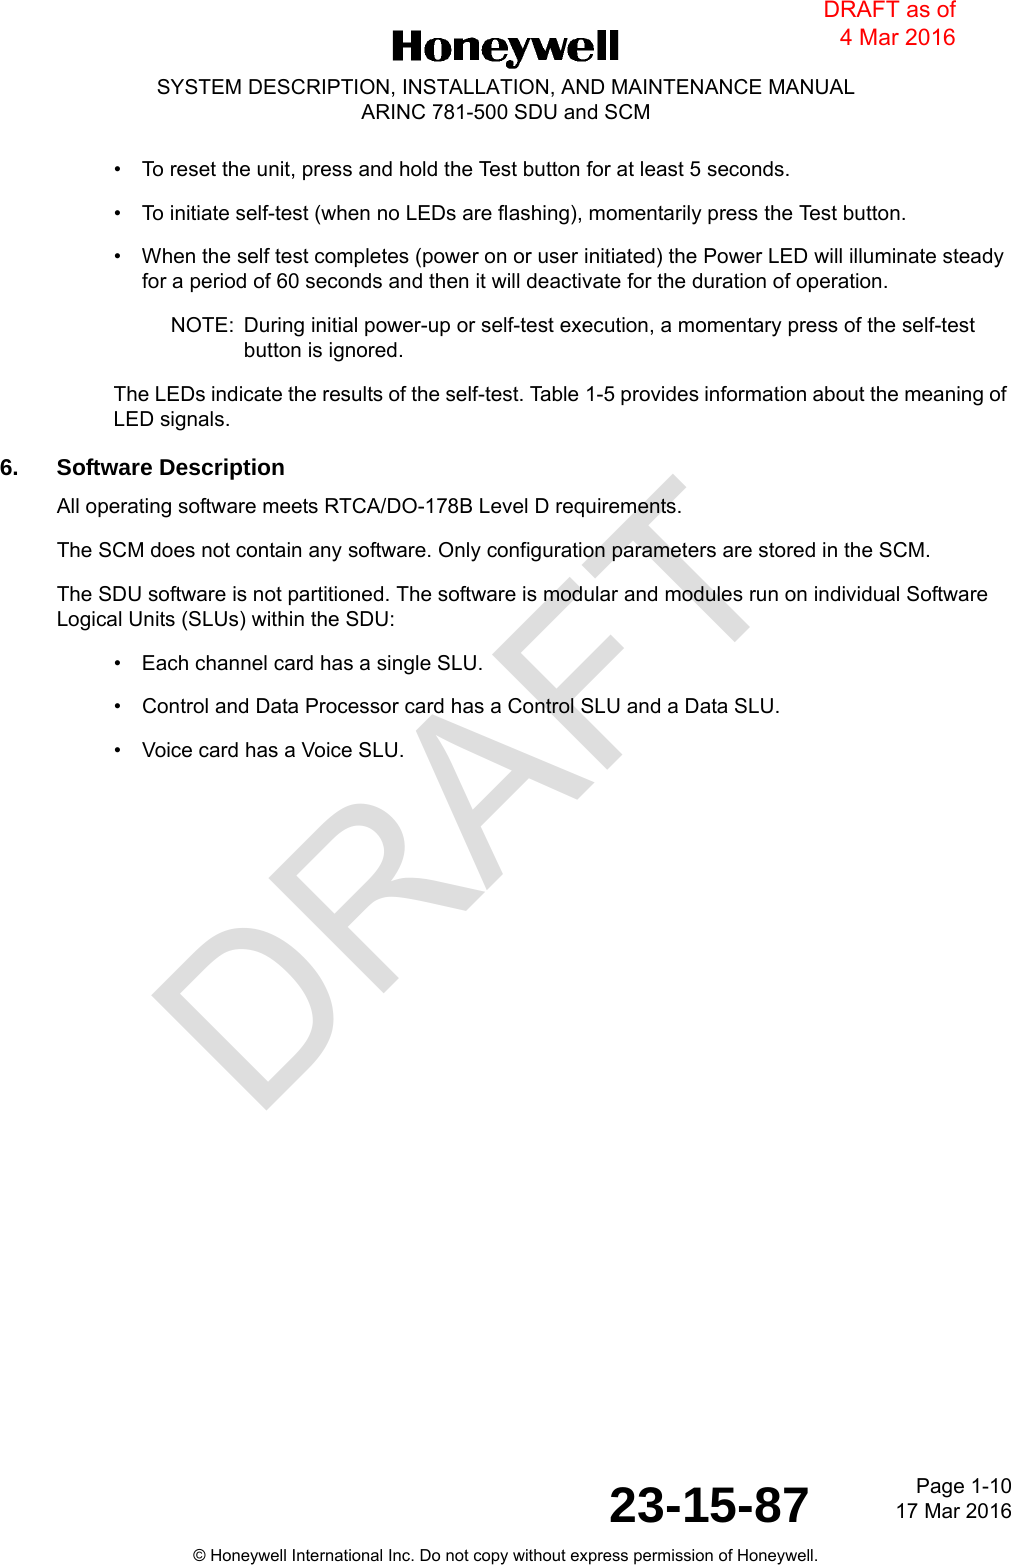 DRAFTPage 1-1017 Mar 201623-15-87© Honeywell International Inc. Do not copy without express permission of Honeywell.SYSTEM DESCRIPTION, INSTALLATION, AND MAINTENANCE MANUALARINC 781-500 SDU and SCM• To reset the unit, press and hold the Test button for at least 5 seconds.• To initiate self-test (when no LEDs are flashing), momentarily press the Test button.• When the self test completes (power on or user initiated) the Power LED will illuminate steady for a period of 60 seconds and then it will deactivate for the duration of operation.NOTE: During initial power-up or self-test execution, a momentary press of the self-test button is ignored.The LEDs indicate the results of the self-test. Table 1-5 provides information about the meaning of LED signals. 6. Software DescriptionAll operating software meets RTCA/DO-178B Level D requirements.The SCM does not contain any software. Only configuration parameters are stored in the SCM.The SDU software is not partitioned. The software is modular and modules run on individual Software Logical Units (SLUs) within the SDU:• Each channel card has a single SLU.• Control and Data Processor card has a Control SLU and a Data SLU.• Voice card has a Voice SLU.DRAFT as of 4 Mar 2016